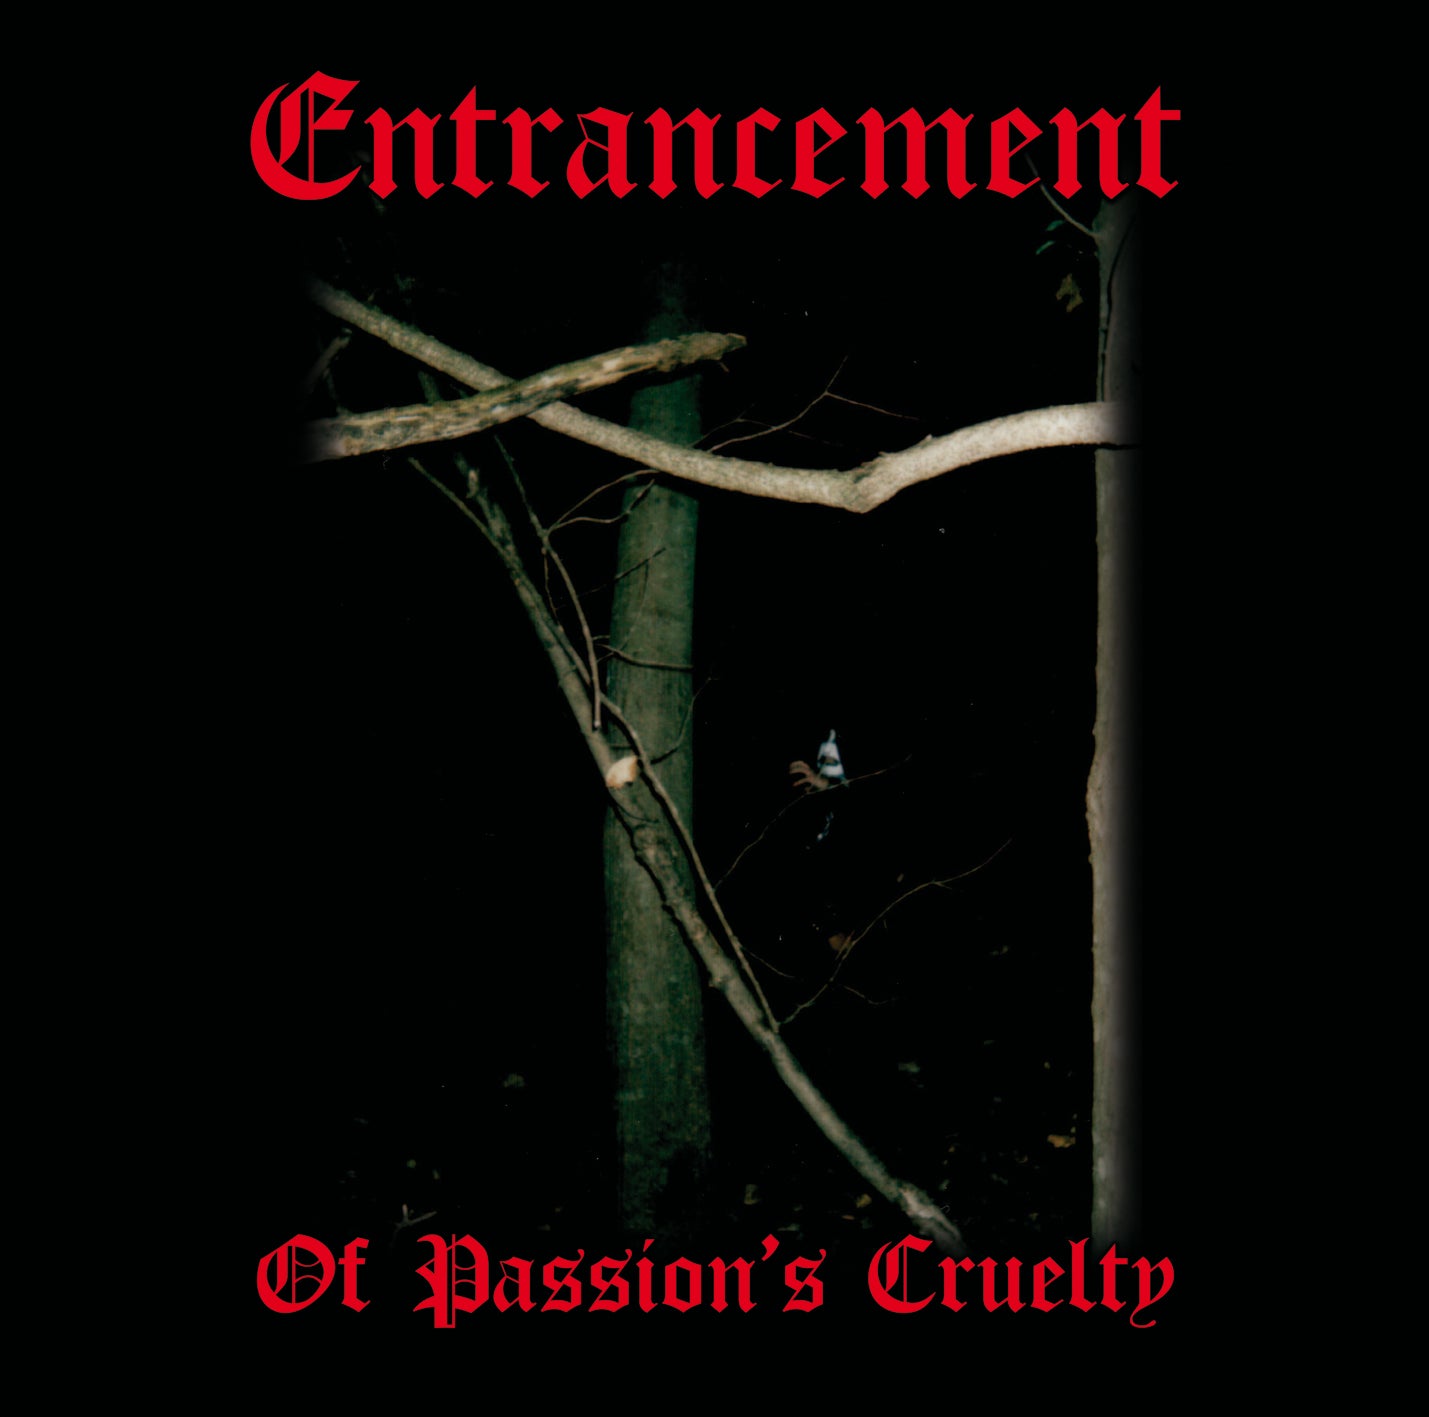 ENTRANCEMENT – Of Passion’s Cruelty [CD]